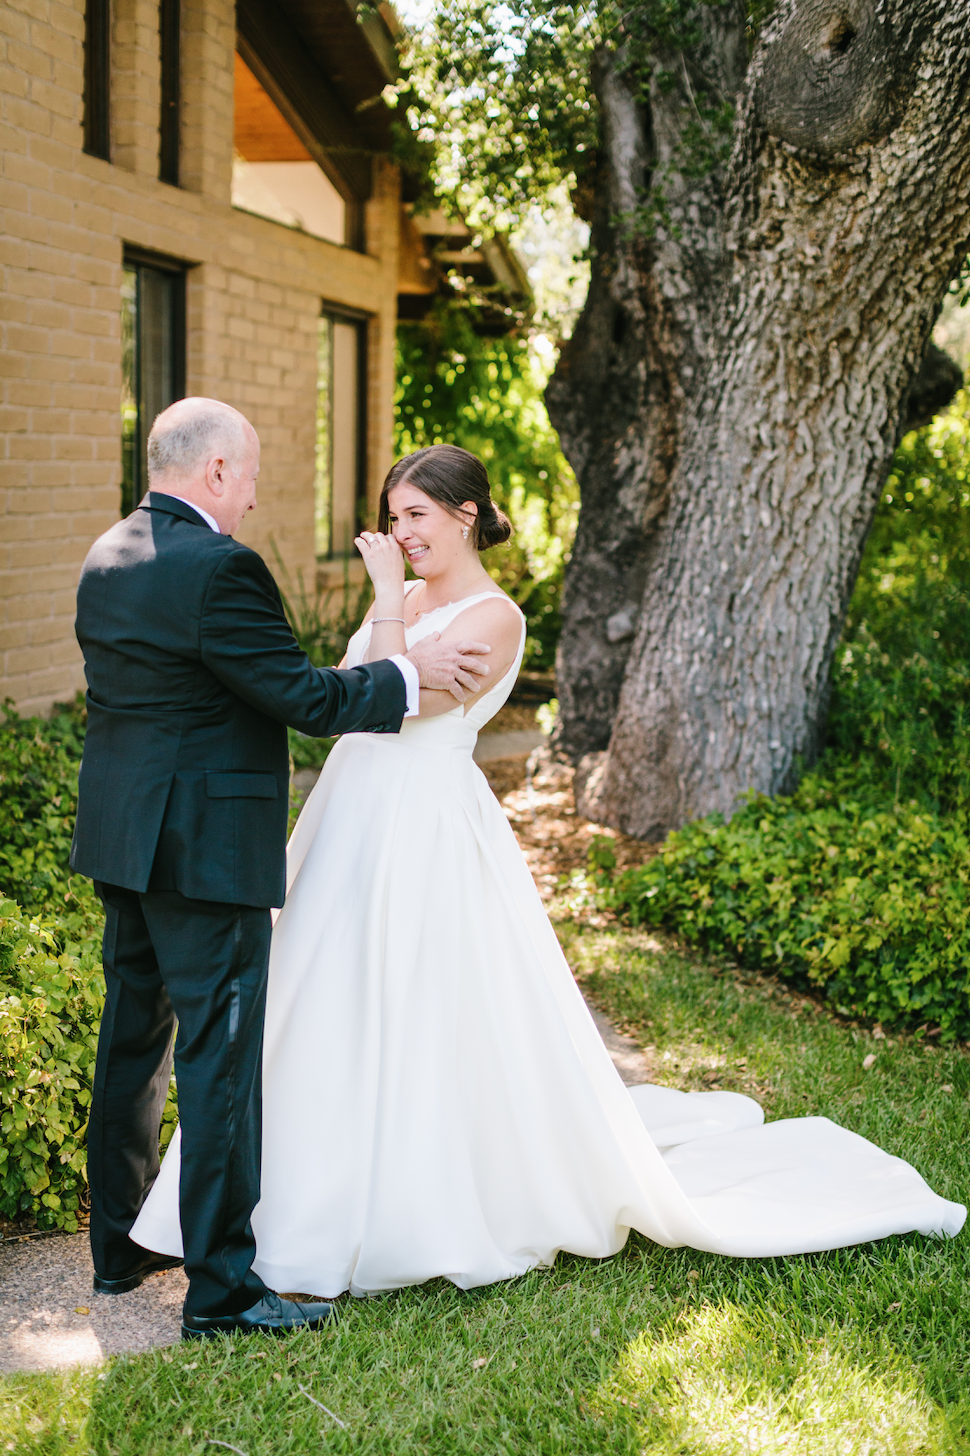 www.santabarbarawedding.com | Foxen Canyon Ranch | Jodee Debes Photography | LVL Weddings |   Jerry Palmer Flowers | Janet Villa | Bride First Look with Her Dad